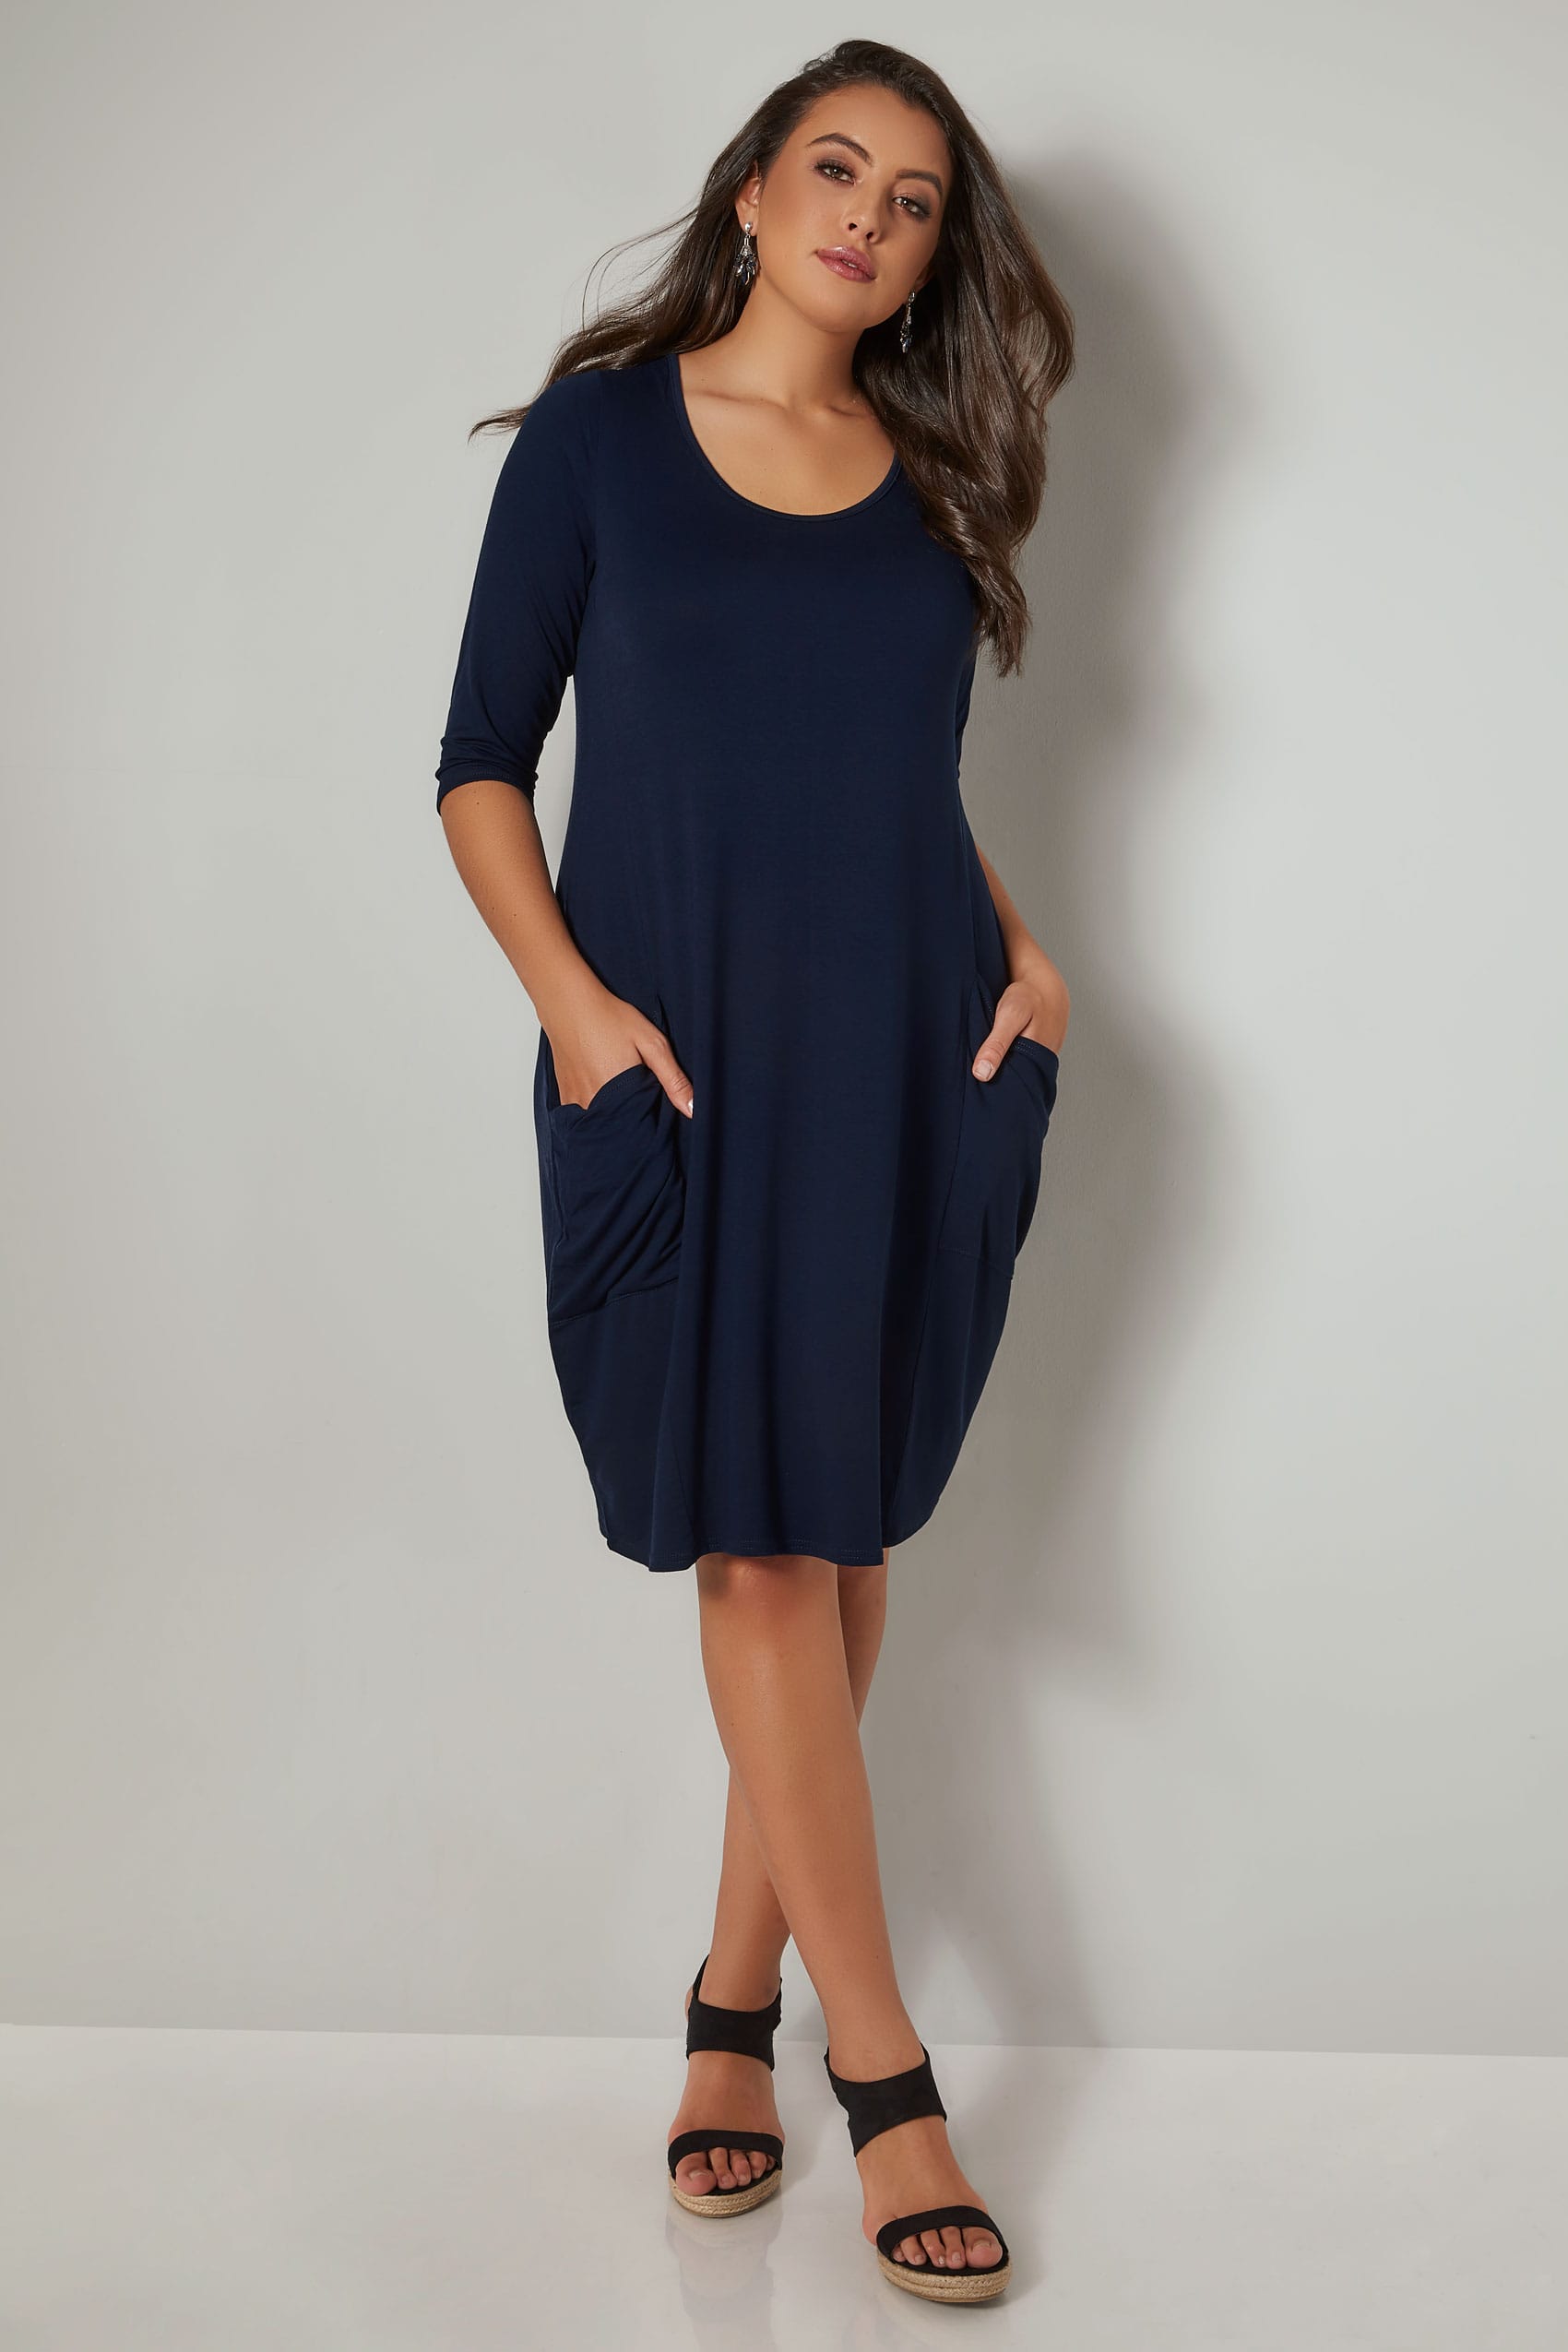 Plus size navy blazer pockets dresses – how cardigans in style clothing ...